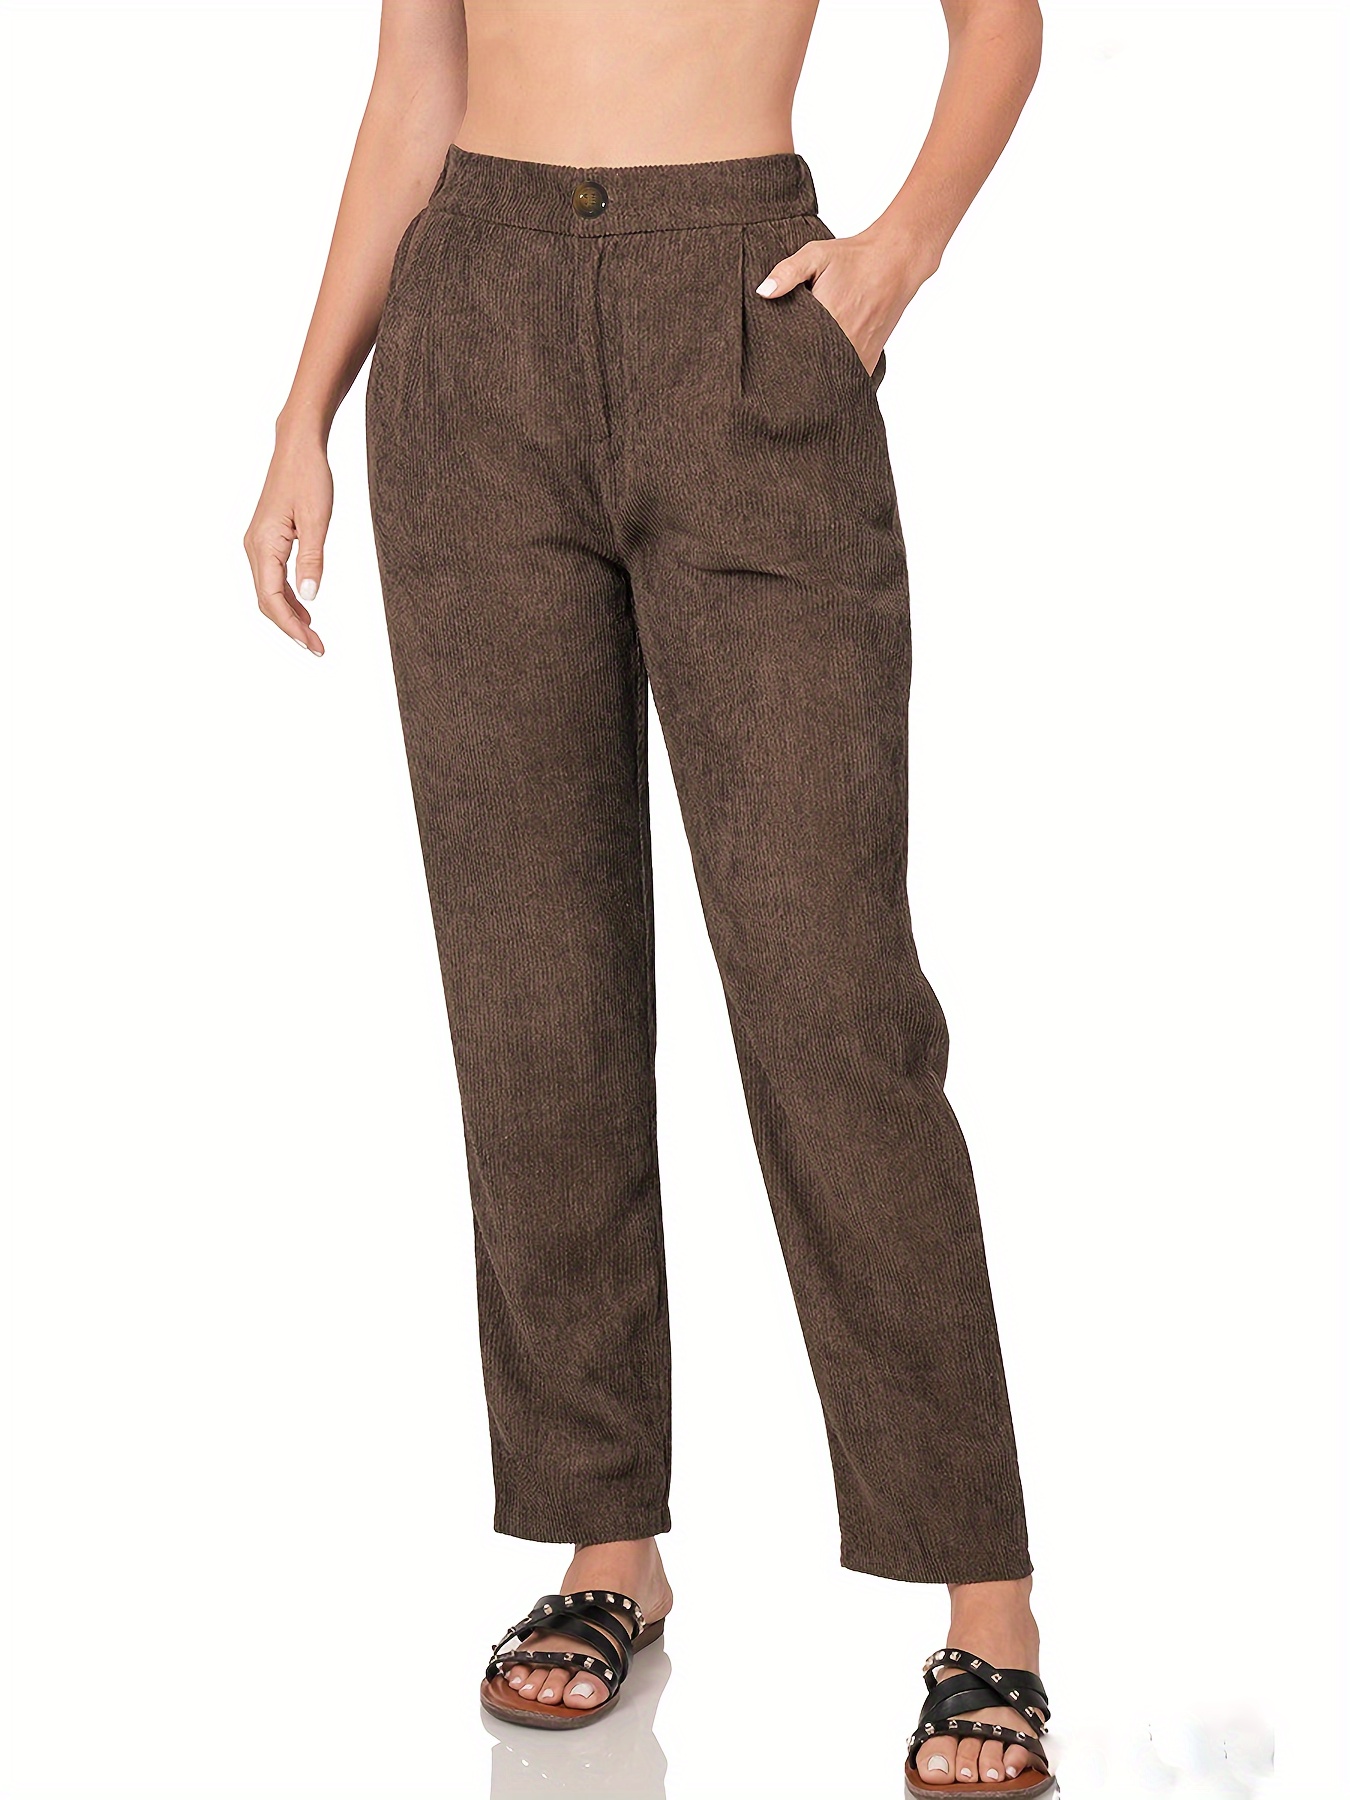 Wide leg corduroy trousers - Women's Clothing Online Made in Italy